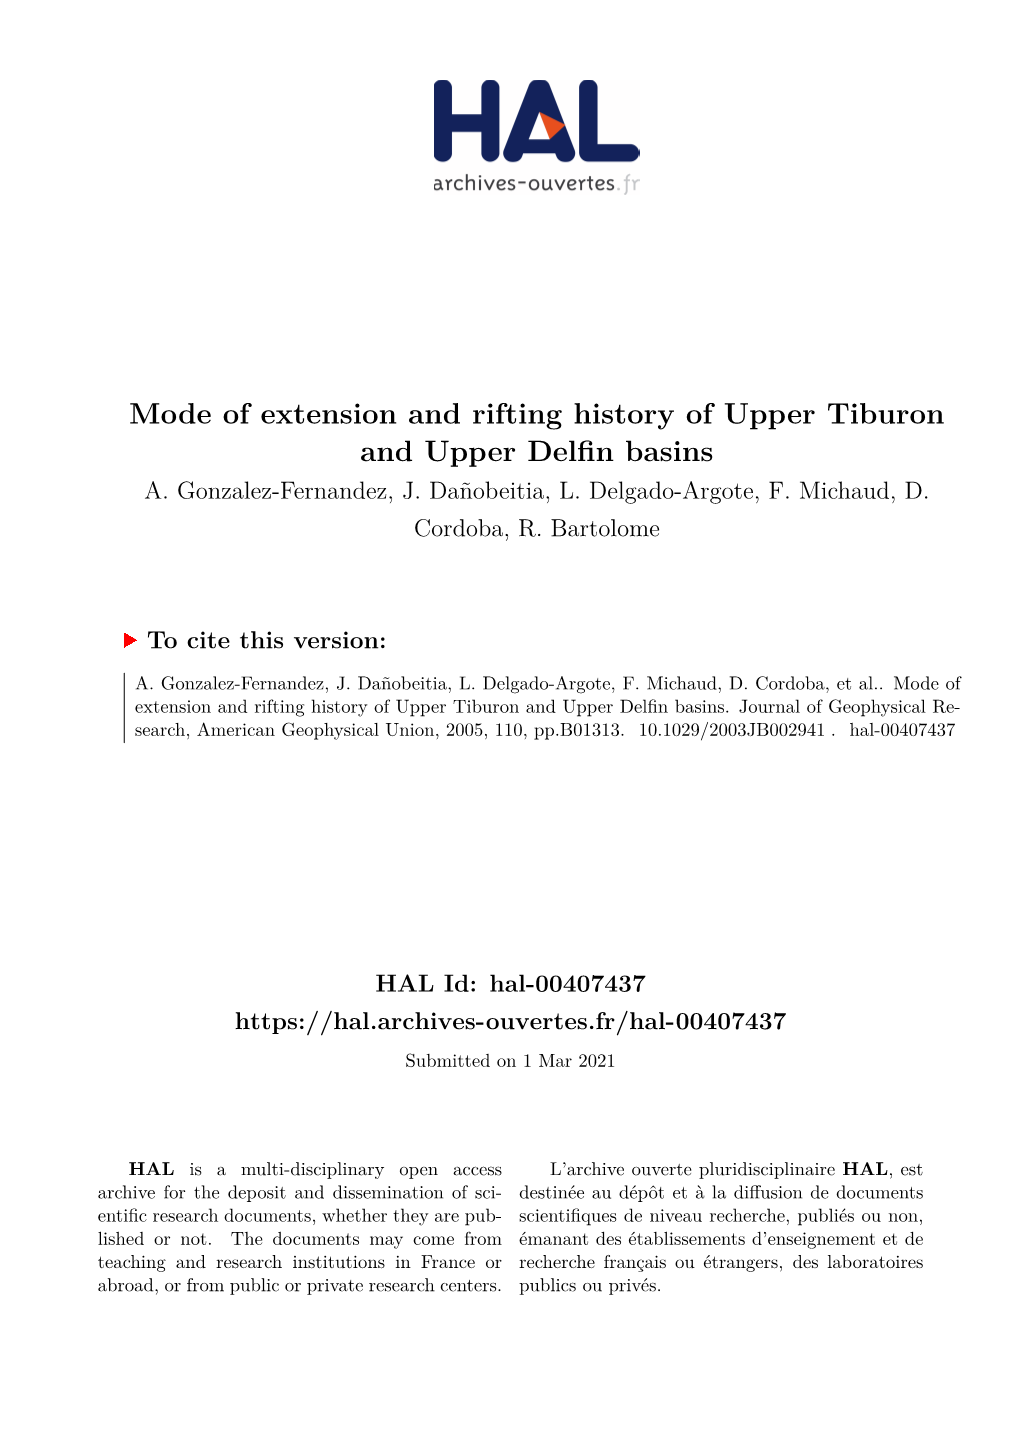 Mode of Extension and Rifting History of Upper Tiburon and Upper Delfin Basins A